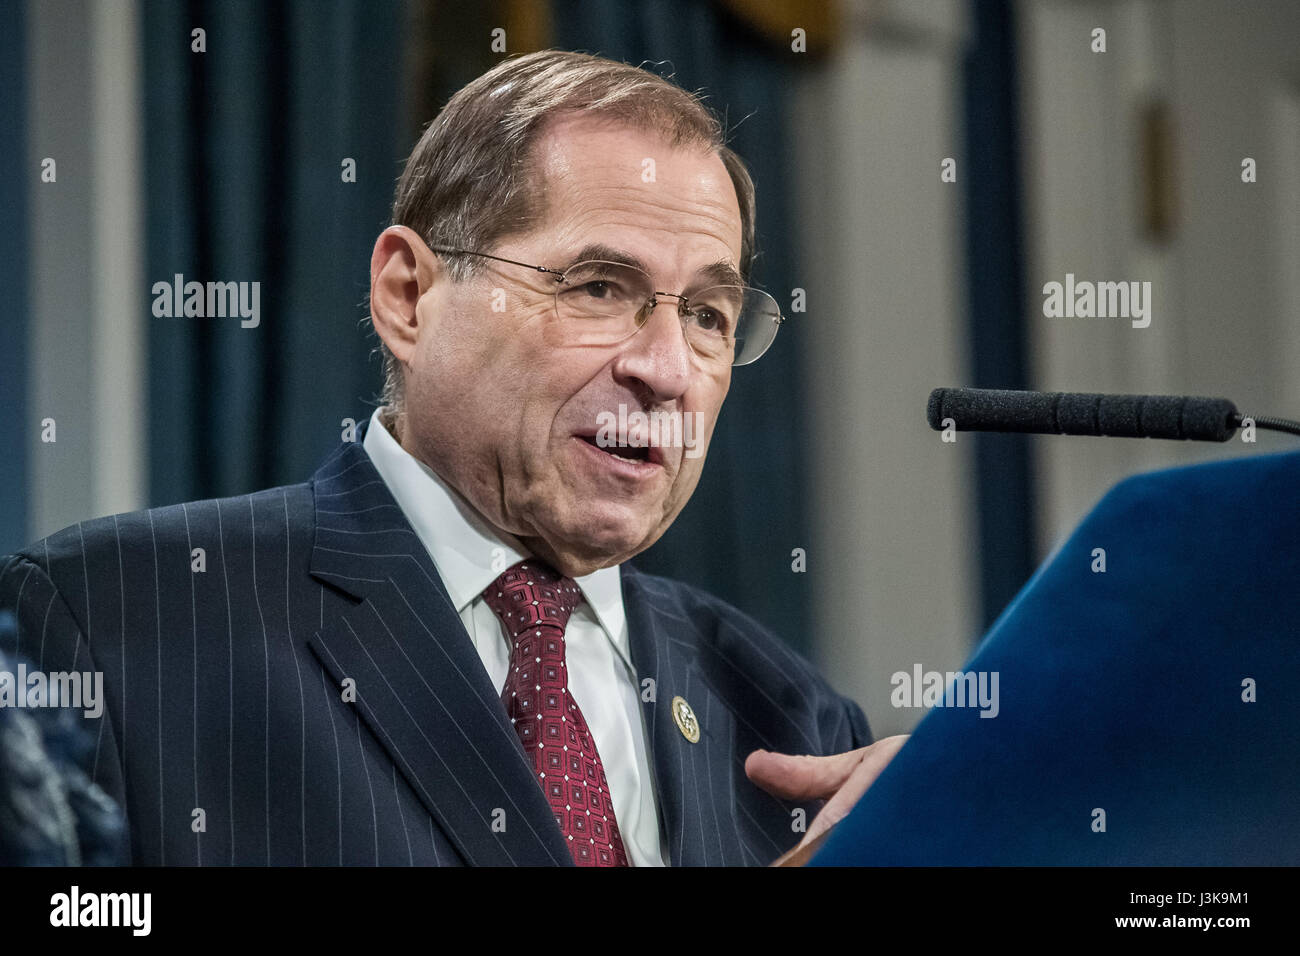 New York, United States. 05th May, 2017. U.S. Representative Jerry Nadler (D - NY 10th District) is seen during the press conference. New York City Mayor Bill de Blasio, joined by U.S. Congress members representing districts in New York City, held a press conference in the Blue Room at City Hall to announce a federal budget deal allowing for $68 million of reimbursements by the federal government for the City's expenses in protecting Trump Tower and the Presidential First Family. Credit: Albin Lohr-Jones/Pacific Press/Alamy Live News Stock Photo